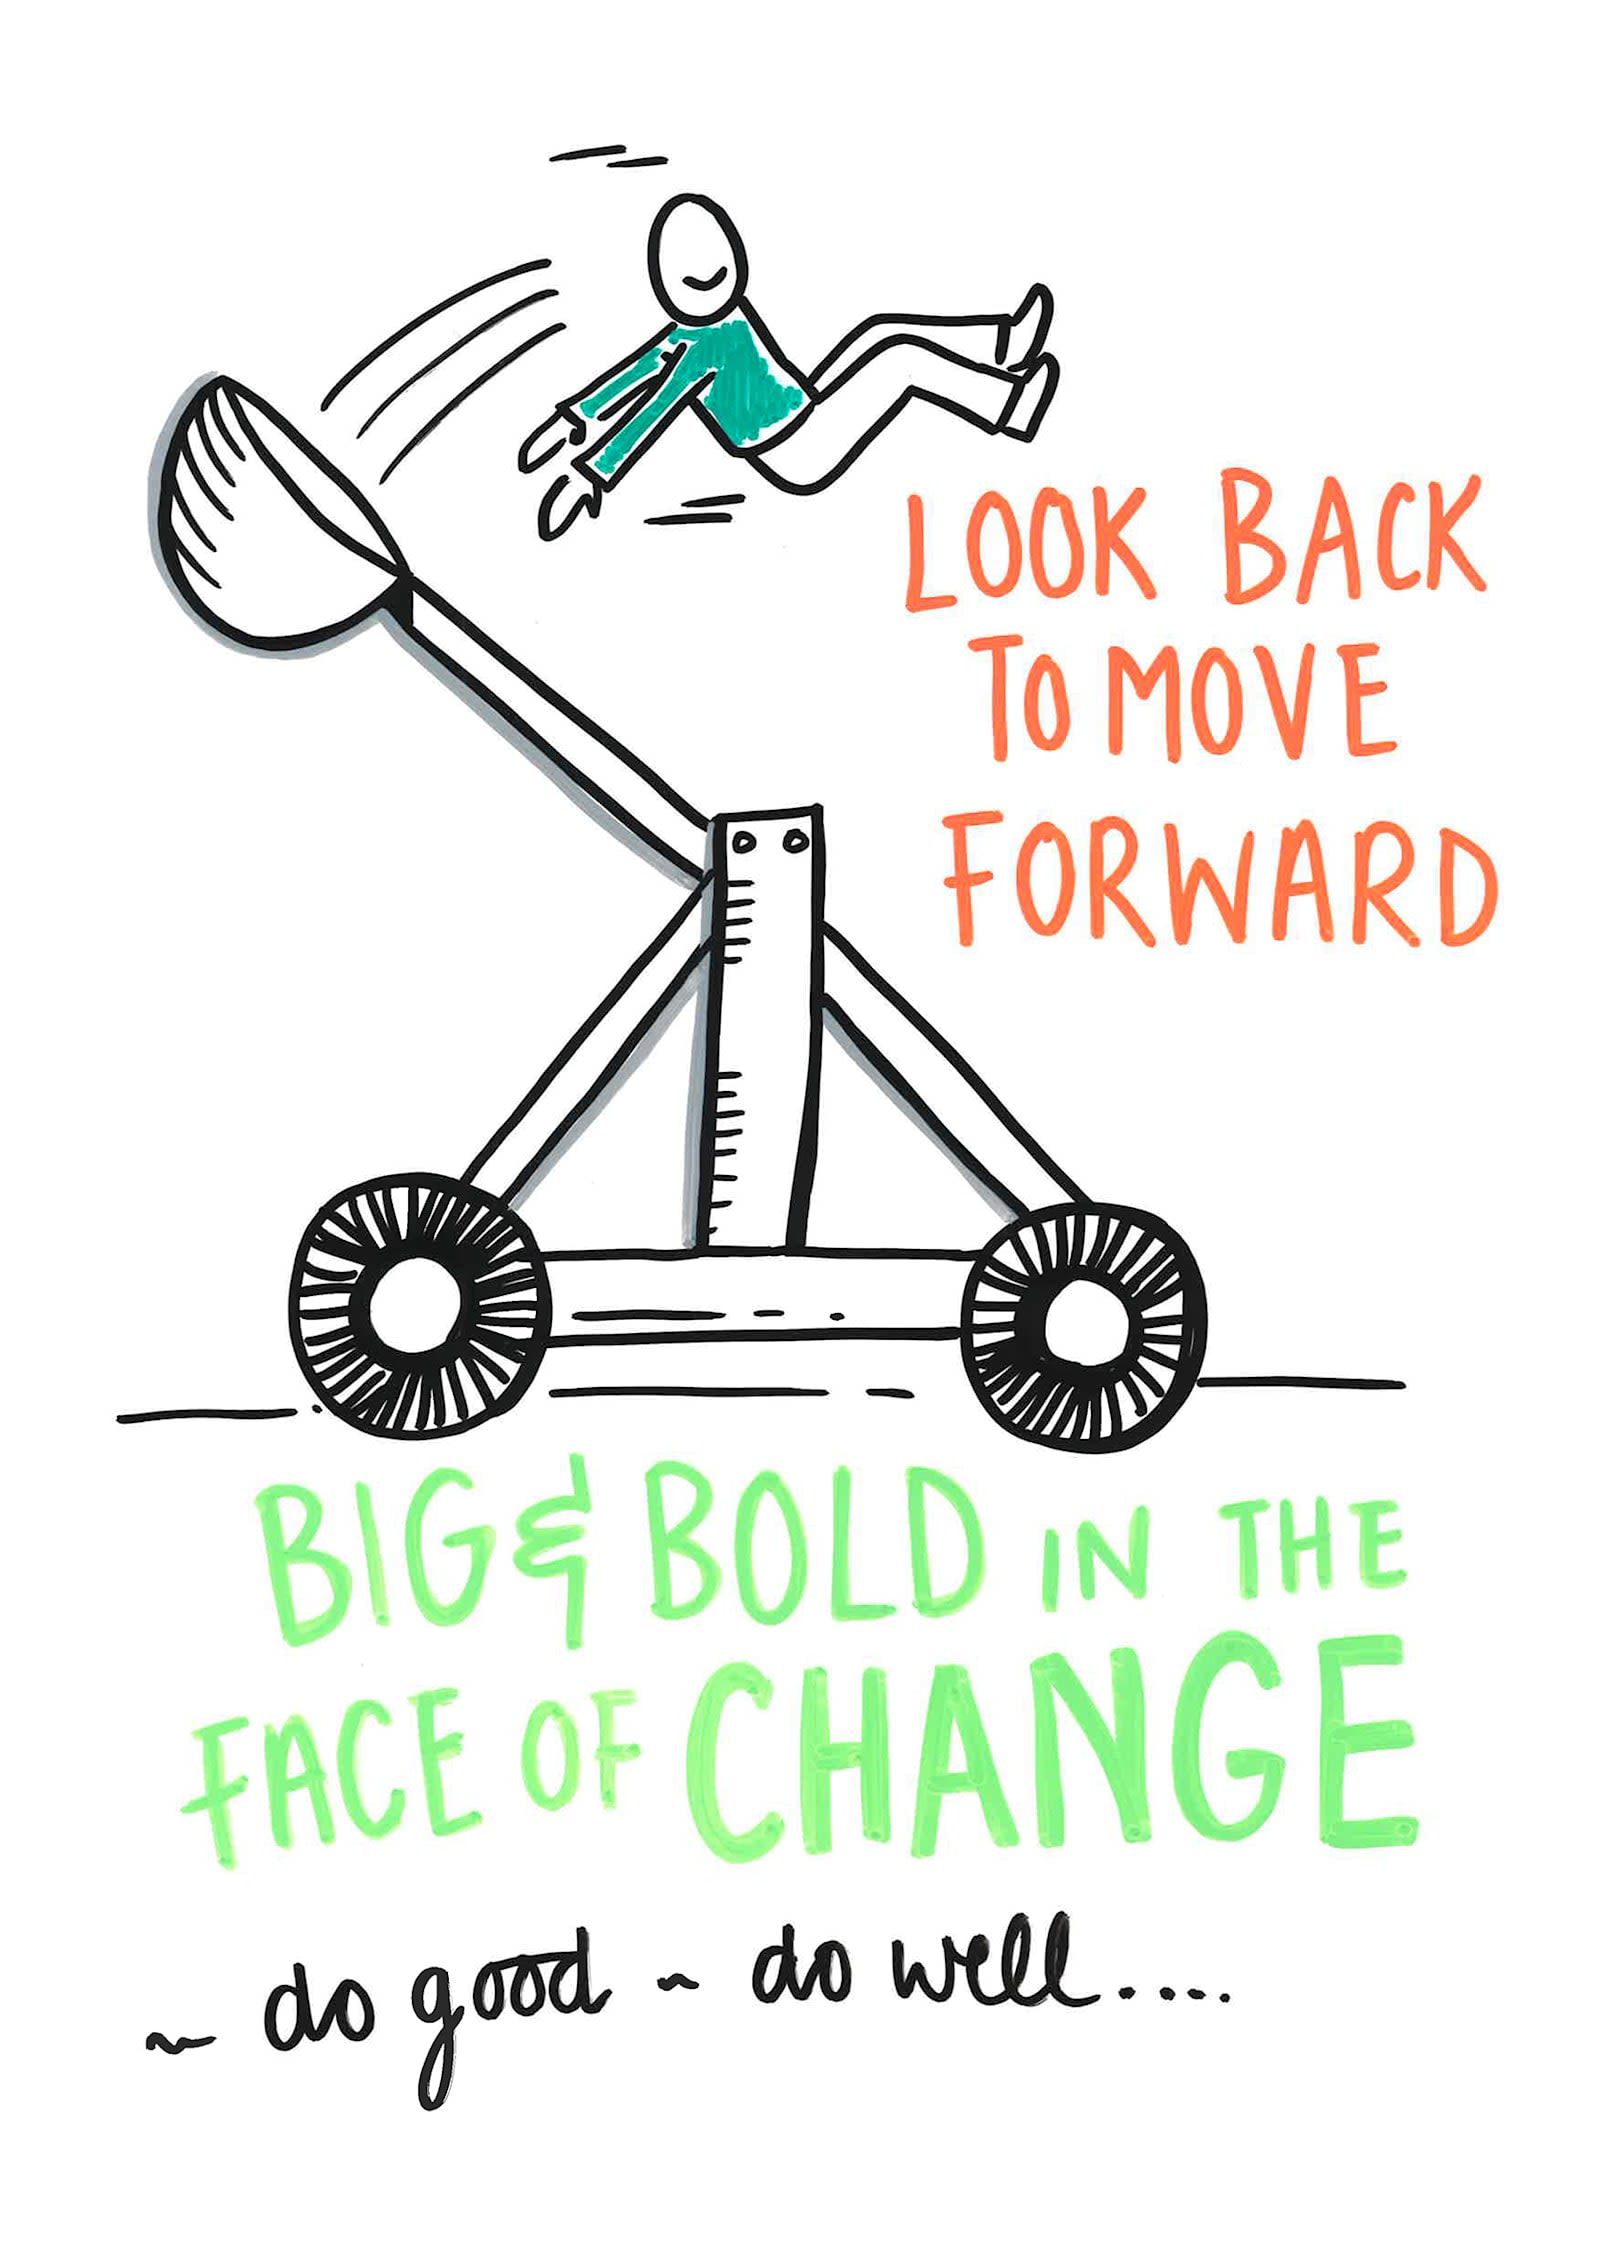 Graphics drawing of a person being catapulted from a catapult with the words "look back to move forward" with the caption "Big & Bold in the face of cgange" followed by " do good " then " do well" .